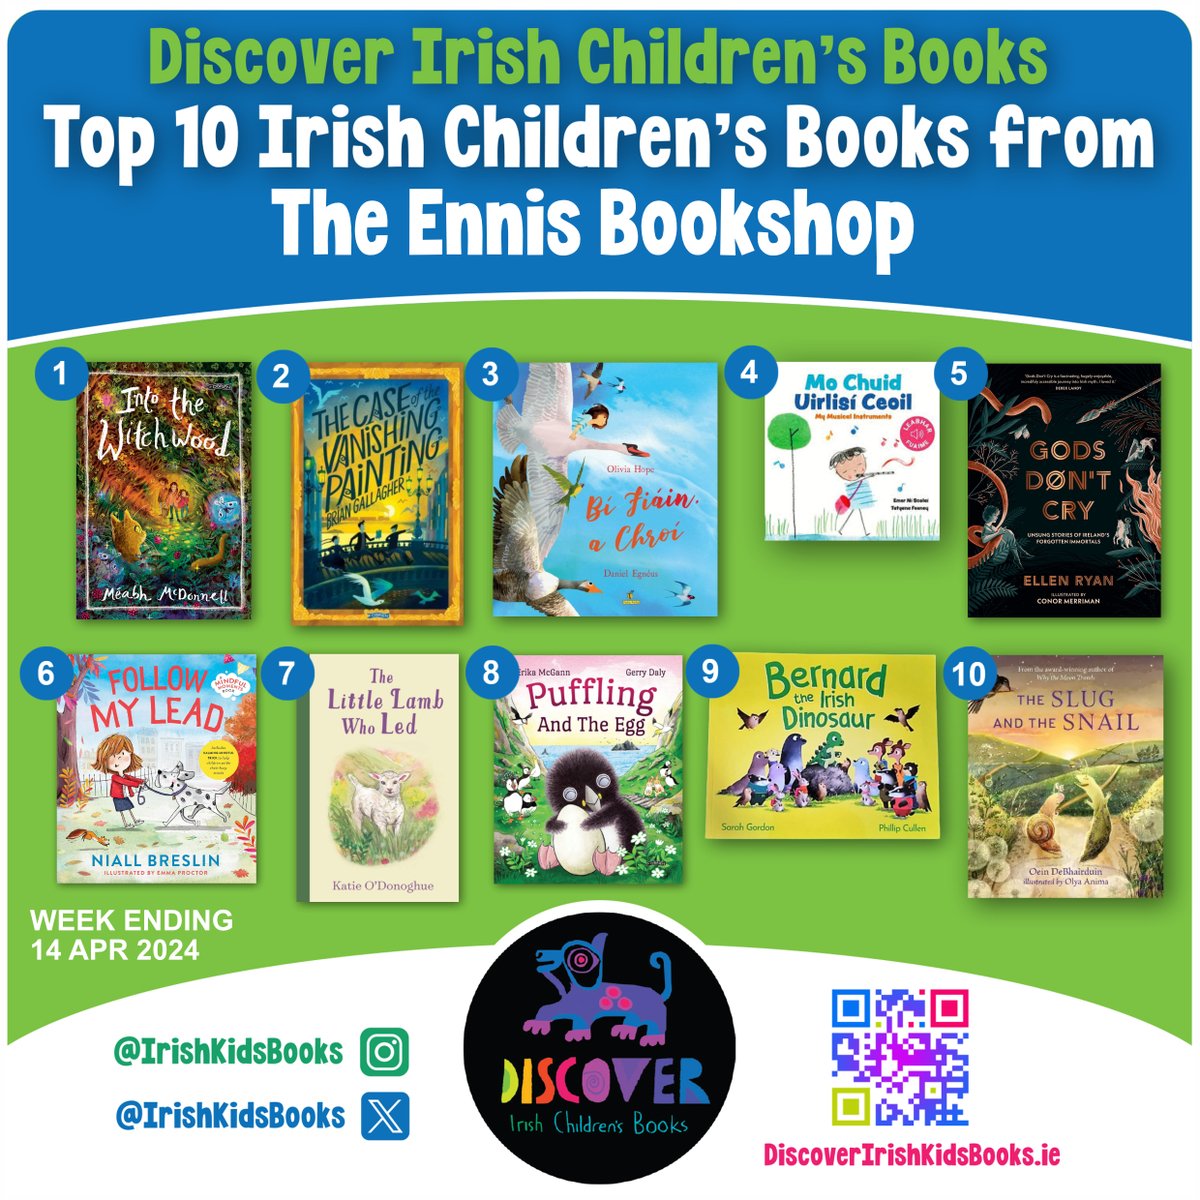 This week's Top 10 Irish Children's Books chart is from The Ennis Bookshop. @IrishKidsBooks Congratulations to no 1 @meabhmcdonnell with her debut novel, Into the Witchwood! ☘️☘️☘️#DiscoverIrishKidsBooks Download this poster here: discoveririshkidsbooks.ie/blog/